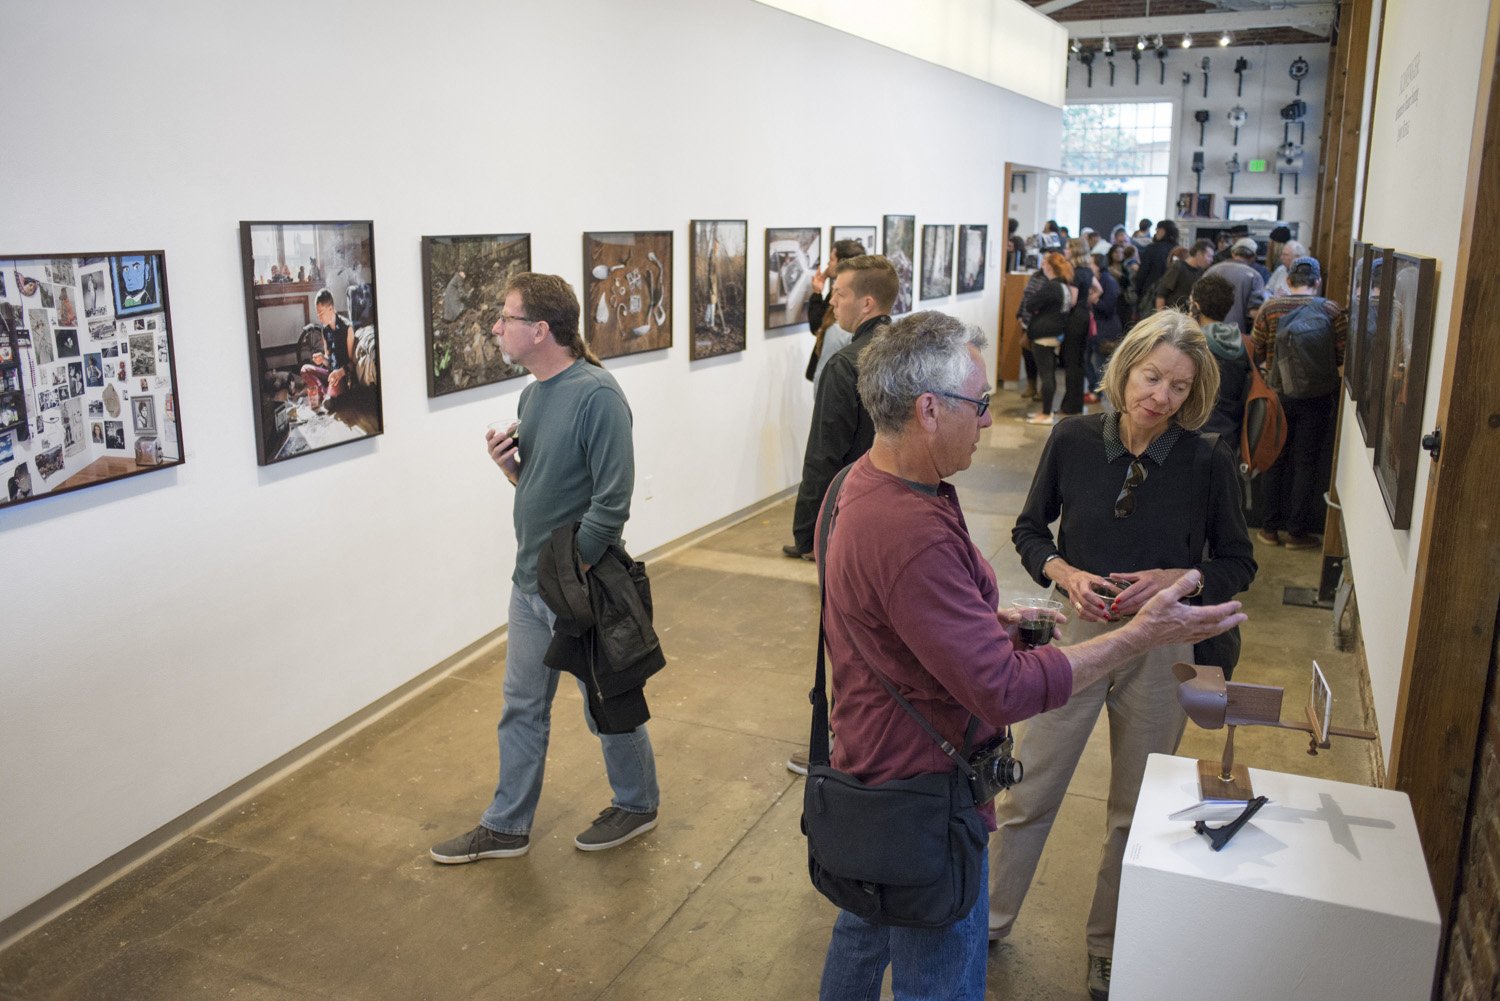 Exhibition view at RayKo Center for Photography, San Francisco, CA, 2014